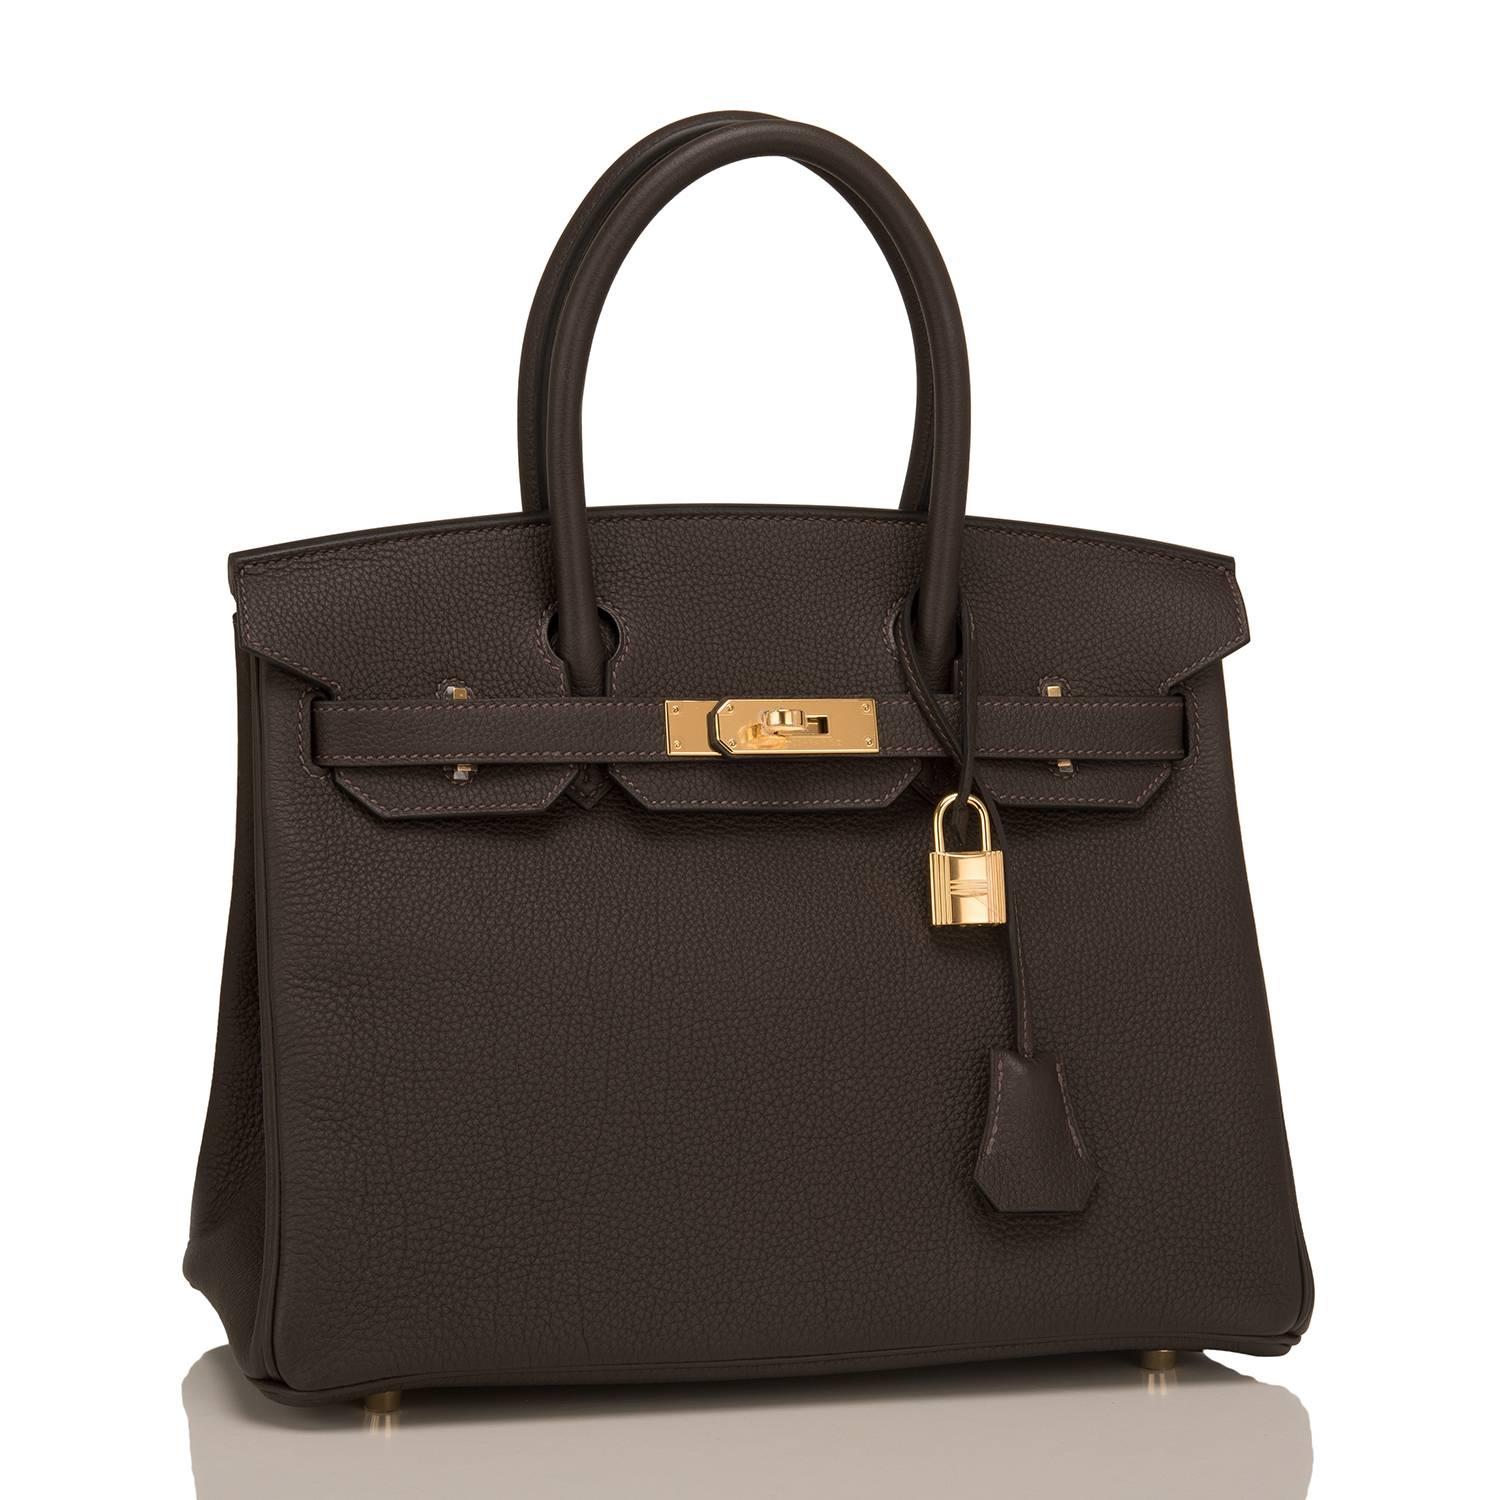 Hermes Macassar Birkin 30cm of Togo leather with gold hardware.

This Birkin has tonal stitching, a front toggle closure, a clochette with lock and two keys, and double rolled handles.

The interior is lined with macassar chevre and has one zip